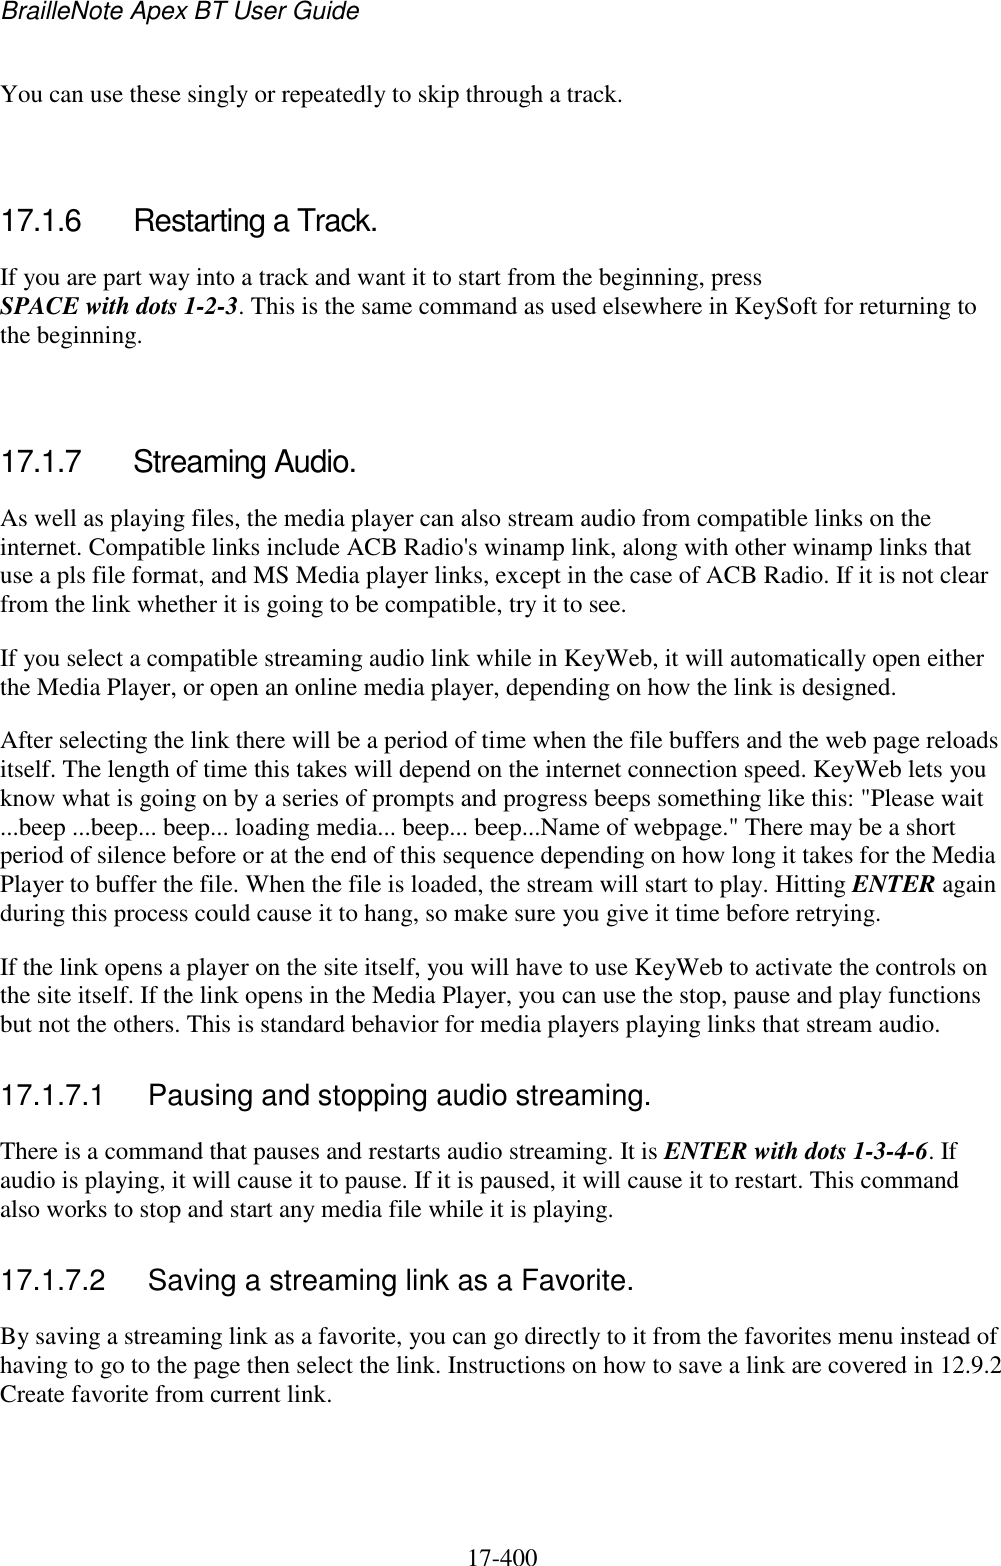 BrailleNote Apex BT User Guide   17-400   You can use these singly or repeatedly to skip through a track.   17.1.6  Restarting a Track. If you are part way into a track and want it to start from the beginning, press SPACE with dots 1-2-3. This is the same command as used elsewhere in KeySoft for returning to the beginning.   17.1.7  Streaming Audio. As well as playing files, the media player can also stream audio from compatible links on the internet. Compatible links include ACB Radio&apos;s winamp link, along with other winamp links that use a pls file format, and MS Media player links, except in the case of ACB Radio. If it is not clear from the link whether it is going to be compatible, try it to see. If you select a compatible streaming audio link while in KeyWeb, it will automatically open either the Media Player, or open an online media player, depending on how the link is designed.  After selecting the link there will be a period of time when the file buffers and the web page reloads itself. The length of time this takes will depend on the internet connection speed. KeyWeb lets you know what is going on by a series of prompts and progress beeps something like this: &quot;Please wait ...beep ...beep... beep... loading media... beep... beep...Name of webpage.&quot; There may be a short period of silence before or at the end of this sequence depending on how long it takes for the Media Player to buffer the file. When the file is loaded, the stream will start to play. Hitting ENTER again during this process could cause it to hang, so make sure you give it time before retrying. If the link opens a player on the site itself, you will have to use KeyWeb to activate the controls on the site itself. If the link opens in the Media Player, you can use the stop, pause and play functions but not the others. This is standard behavior for media players playing links that stream audio.  17.1.7.1  Pausing and stopping audio streaming. There is a command that pauses and restarts audio streaming. It is ENTER with dots 1-3-4-6. If audio is playing, it will cause it to pause. If it is paused, it will cause it to restart. This command also works to stop and start any media file while it is playing.  17.1.7.2  Saving a streaming link as a Favorite. By saving a streaming link as a favorite, you can go directly to it from the favorites menu instead of having to go to the page then select the link. Instructions on how to save a link are covered in 12.9.2 Create favorite from current link.    